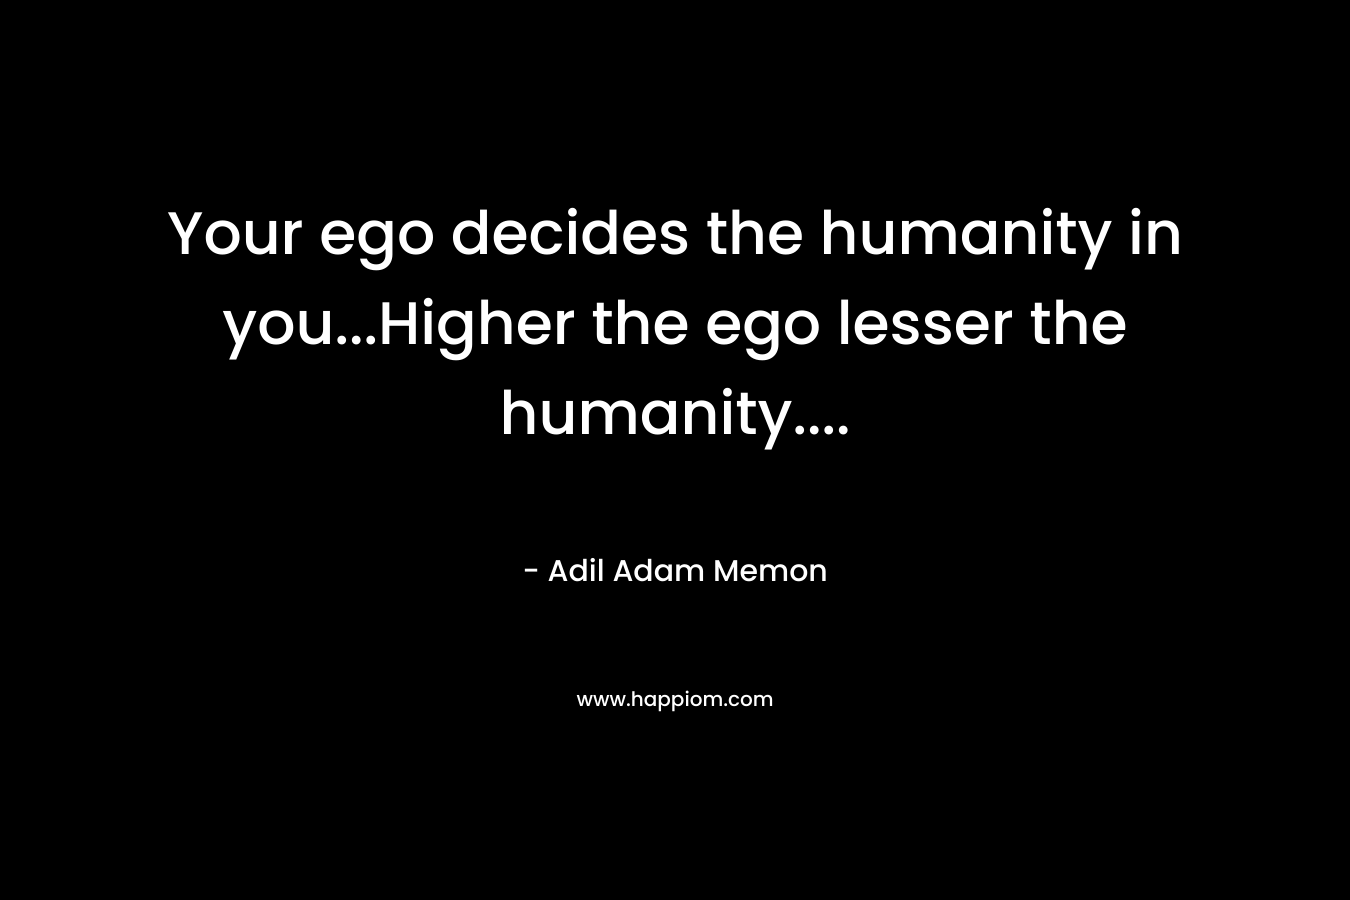 Your ego decides the humanity in you...Higher the ego lesser the humanity....